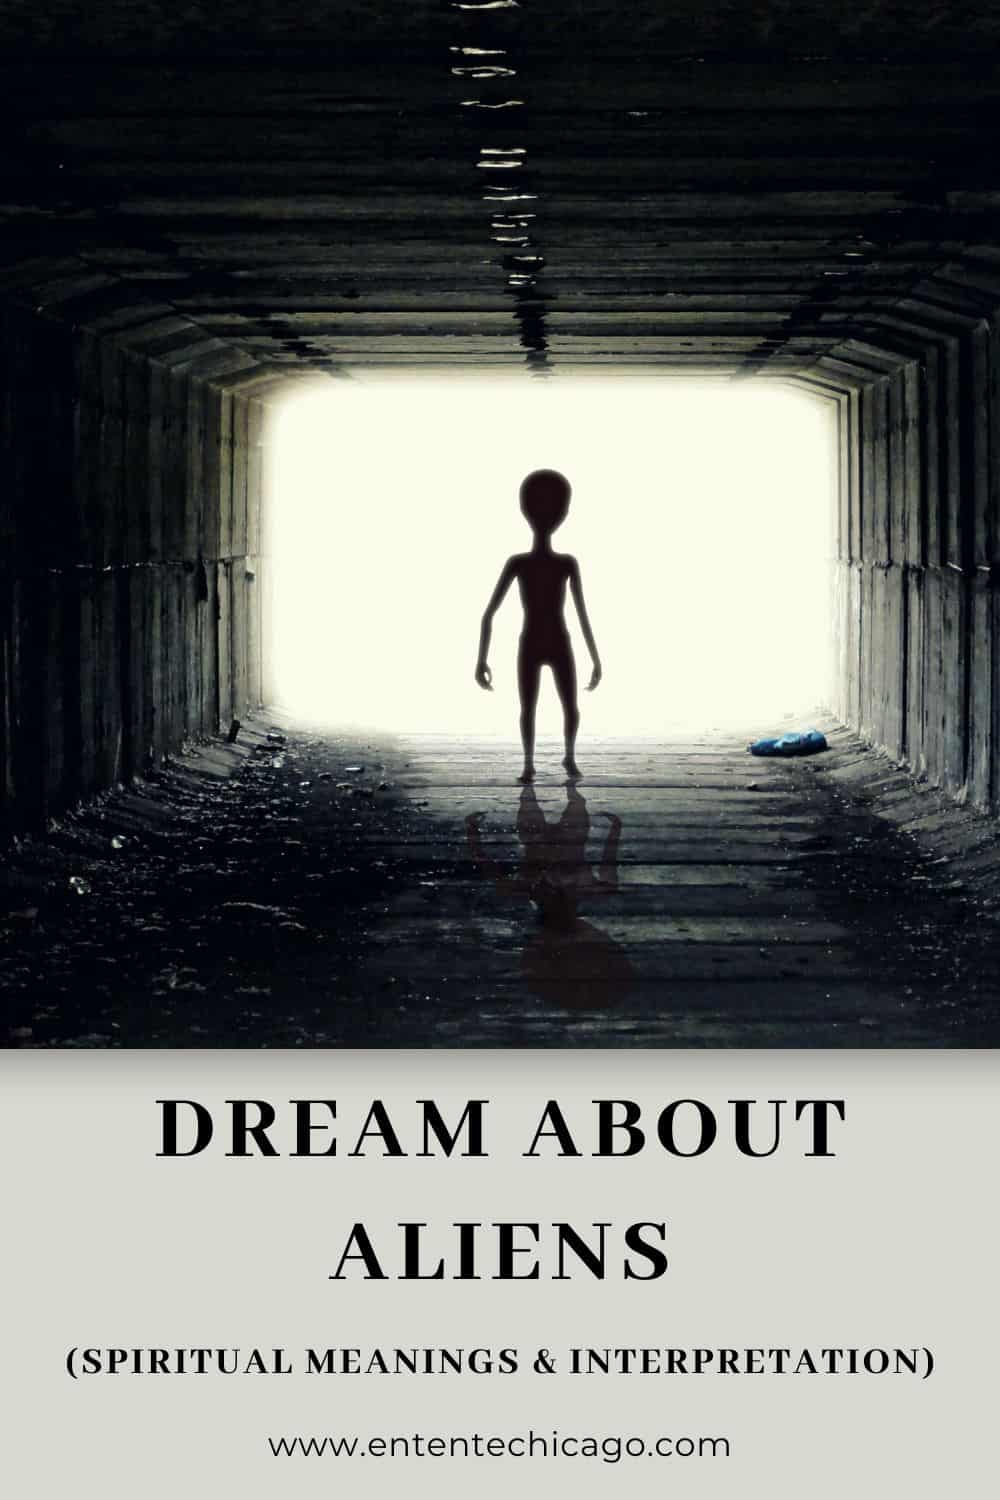 What Do Dreams About Aliens Mean